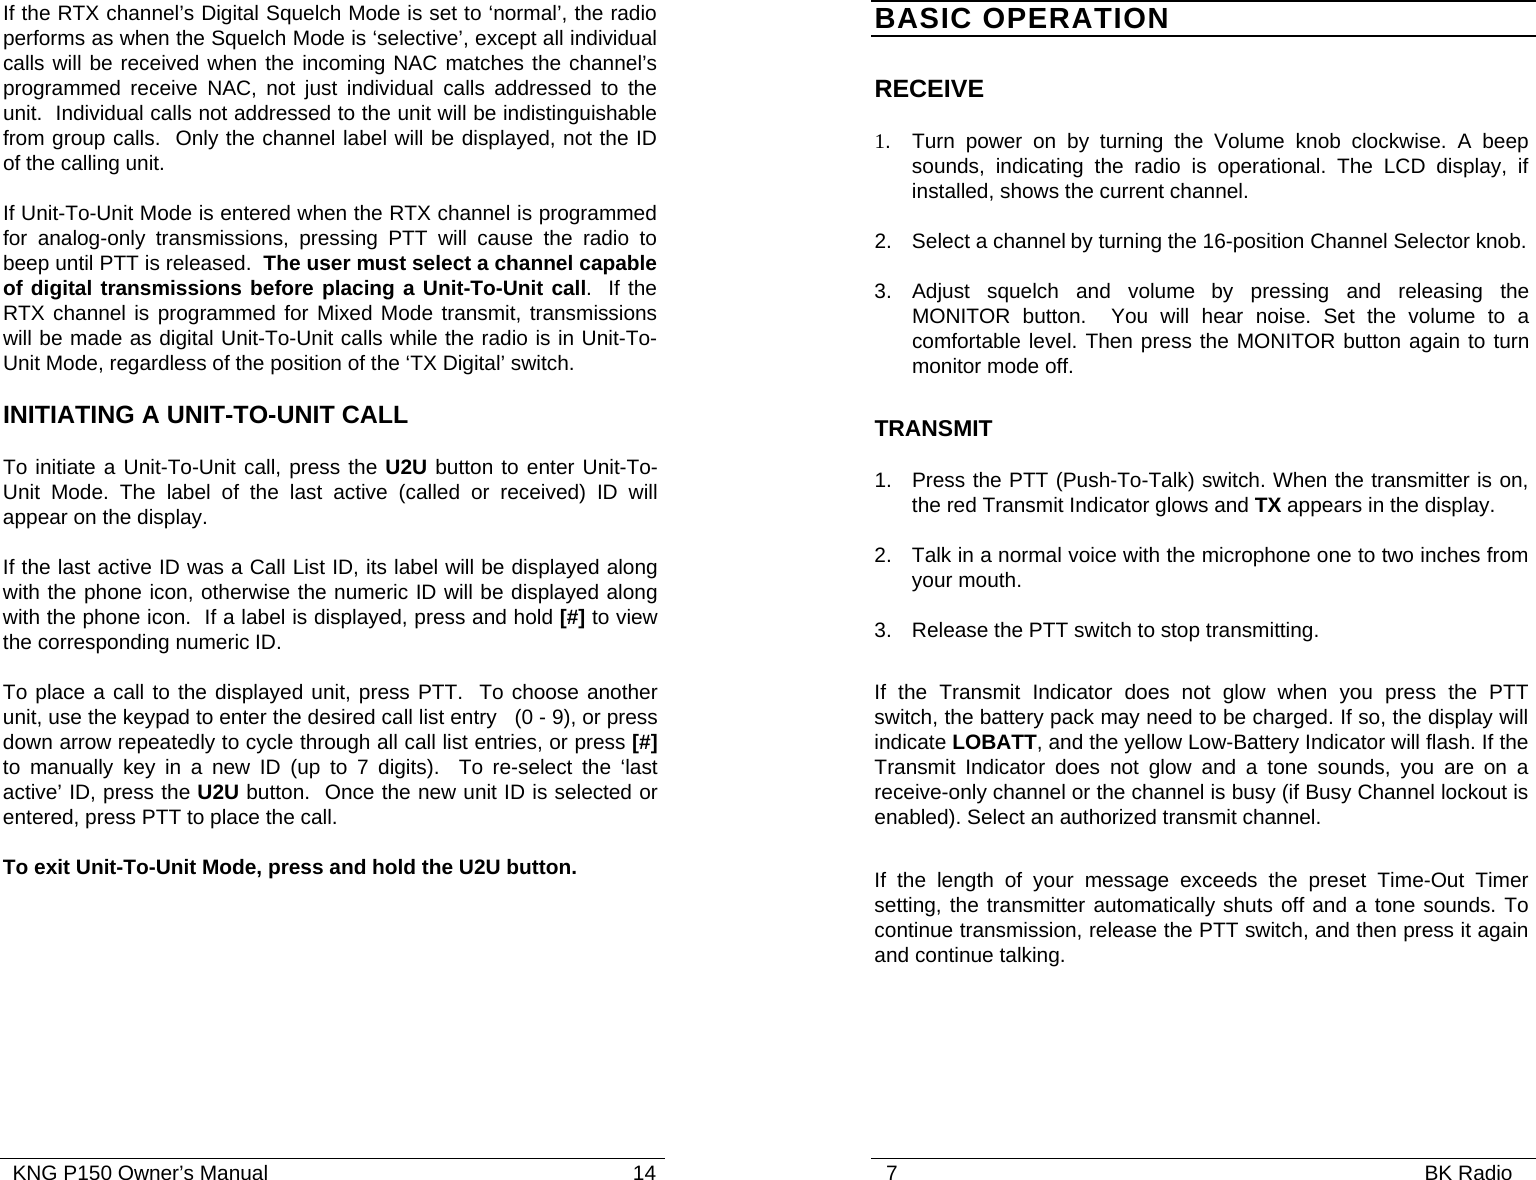   KNG P150 Owner’s Manual                                                               14 If the RTX channel’s Digital Squelch Mode is set to ‘normal’, the radio performs as when the Squelch Mode is ‘selective’, except all individual calls will be received when the incoming NAC matches the channel’s programmed receive NAC, not just individual calls addressed to the unit.  Individual calls not addressed to the unit will be indistinguishable from group calls.  Only the channel label will be displayed, not the ID of the calling unit.   If Unit-To-Unit Mode is entered when the RTX channel is programmed for analog-only transmissions, pressing PTT will cause the radio to beep until PTT is released.  The user must select a channel capable of digital transmissions before placing a Unit-To-Unit call.  If the RTX channel is programmed for Mixed Mode transmit, transmissions will be made as digital Unit-To-Unit calls while the radio is in Unit-To-Unit Mode, regardless of the position of the ‘TX Digital’ switch. INITIATING A UNIT-TO-UNIT CALL To initiate a Unit-To-Unit call, press the U2U button to enter Unit-To-Unit Mode. The label of the last active (called or received) ID will appear on the display. If the last active ID was a Call List ID, its label will be displayed along with the phone icon, otherwise the numeric ID will be displayed along with the phone icon.  If a label is displayed, press and hold [#] to view the corresponding numeric ID.     To place a call to the displayed unit, press PTT.  To choose another unit, use the keypad to enter the desired call list entry   (0 - 9), or press down arrow repeatedly to cycle through all call list entries, or press [#] to manually key in a new ID (up to 7 digits).  To re-select the ‘last active’ ID, press the U2U button.  Once the new unit ID is selected or entered, press PTT to place the call. To exit Unit-To-Unit Mode, press and hold the U2U button.   7                                                                                           BK Radio              BASIC OPERATION RECEIVE  1.   Turn power on by turning the Volume knob clockwise. A beep sounds, indicating the radio is operational. The LCD display, if installed, shows the current channel. 2. Select a channel by turning the 16-position Channel Selector knob.   3. Adjust squelch and volume by pressing and releasing the MONITOR button.  You will hear noise. Set the volume to a comfortable level. Then press the MONITOR button again to turn monitor mode off.    TRANSMIT  1.   Press the PTT (Push-To-Talk) switch. When the transmitter is on, the red Transmit Indicator glows and TX appears in the display.   2. Talk in a normal voice with the microphone one to two inches from your mouth. 3. Release the PTT switch to stop transmitting. If the Transmit Indicator does not glow when you press the PTT switch, the battery pack may need to be charged. If so, the display will indicate LOBATT, and the yellow Low-Battery Indicator will flash. If the Transmit Indicator does not glow and a tone sounds, you are on a receive-only channel or the channel is busy (if Busy Channel lockout is enabled). Select an authorized transmit channel. If the length of your message exceeds the preset Time-Out Timer setting, the transmitter automatically shuts off and a tone sounds. To continue transmission, release the PTT switch, and then press it again and continue talking. 